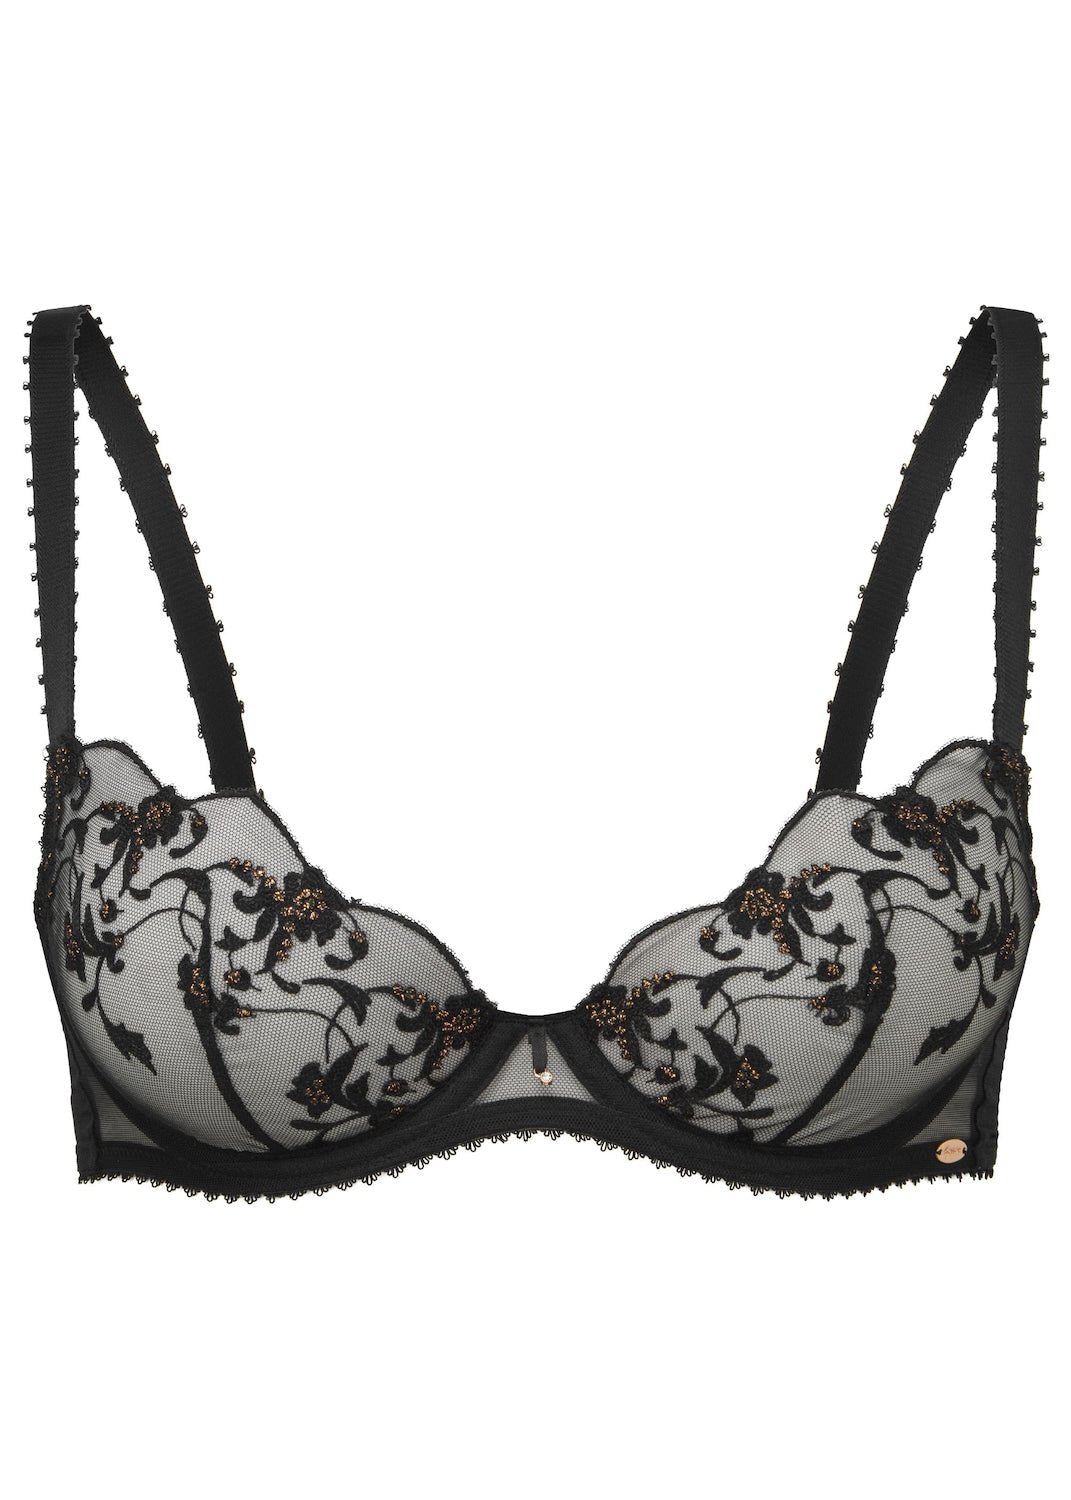 Aubade Queen of Shadow Padded Bra in Black: 38E